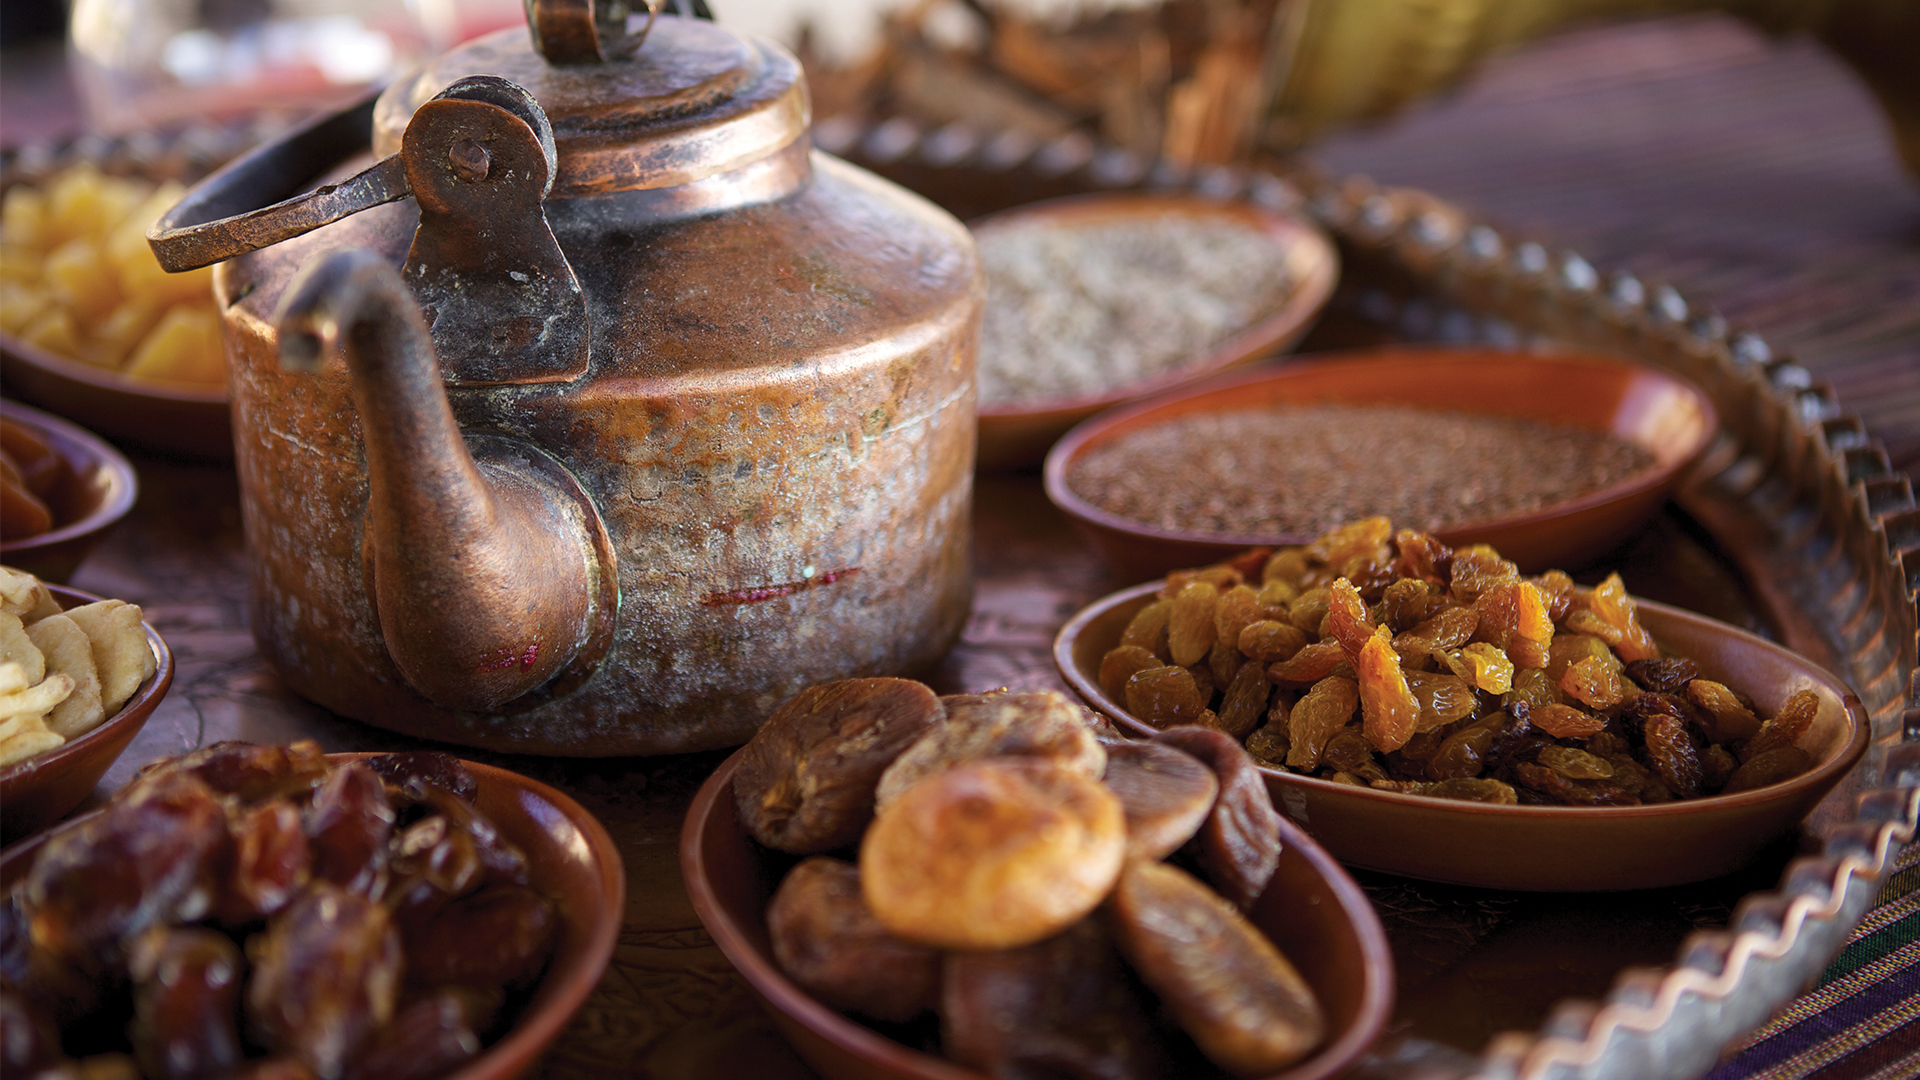 Bedouin tea with nuts and dried fruit